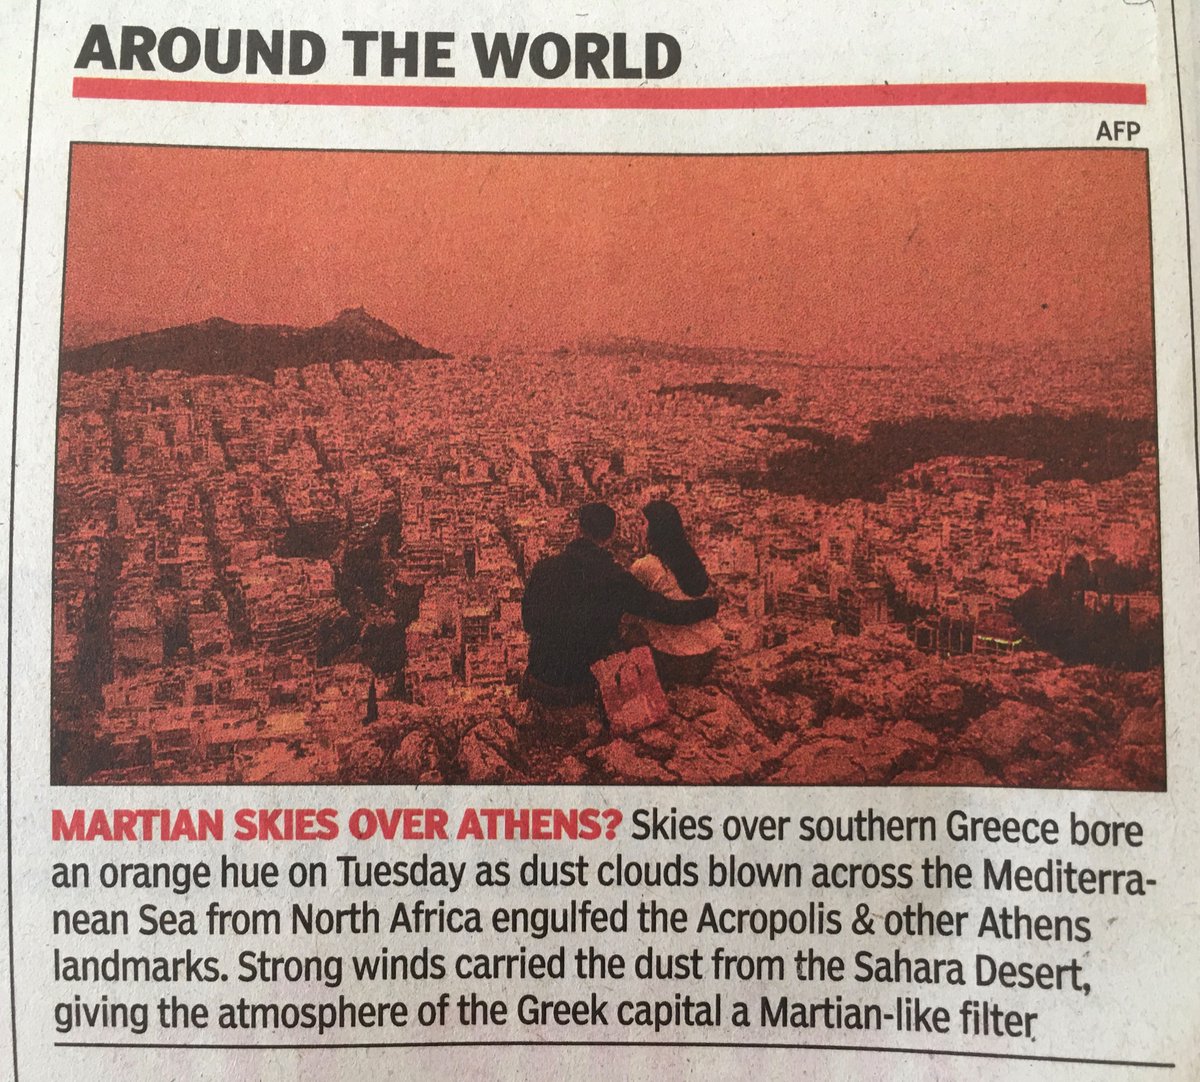 When the dust from the Sahara Desert reached Greece’s atmosphere-

#NoFilter 

More common in the future? 
Signs of times to come & lesson of nature?
#FutureTense

PC: @timesofindia 2 weeks ago- Apr 25 ‘24